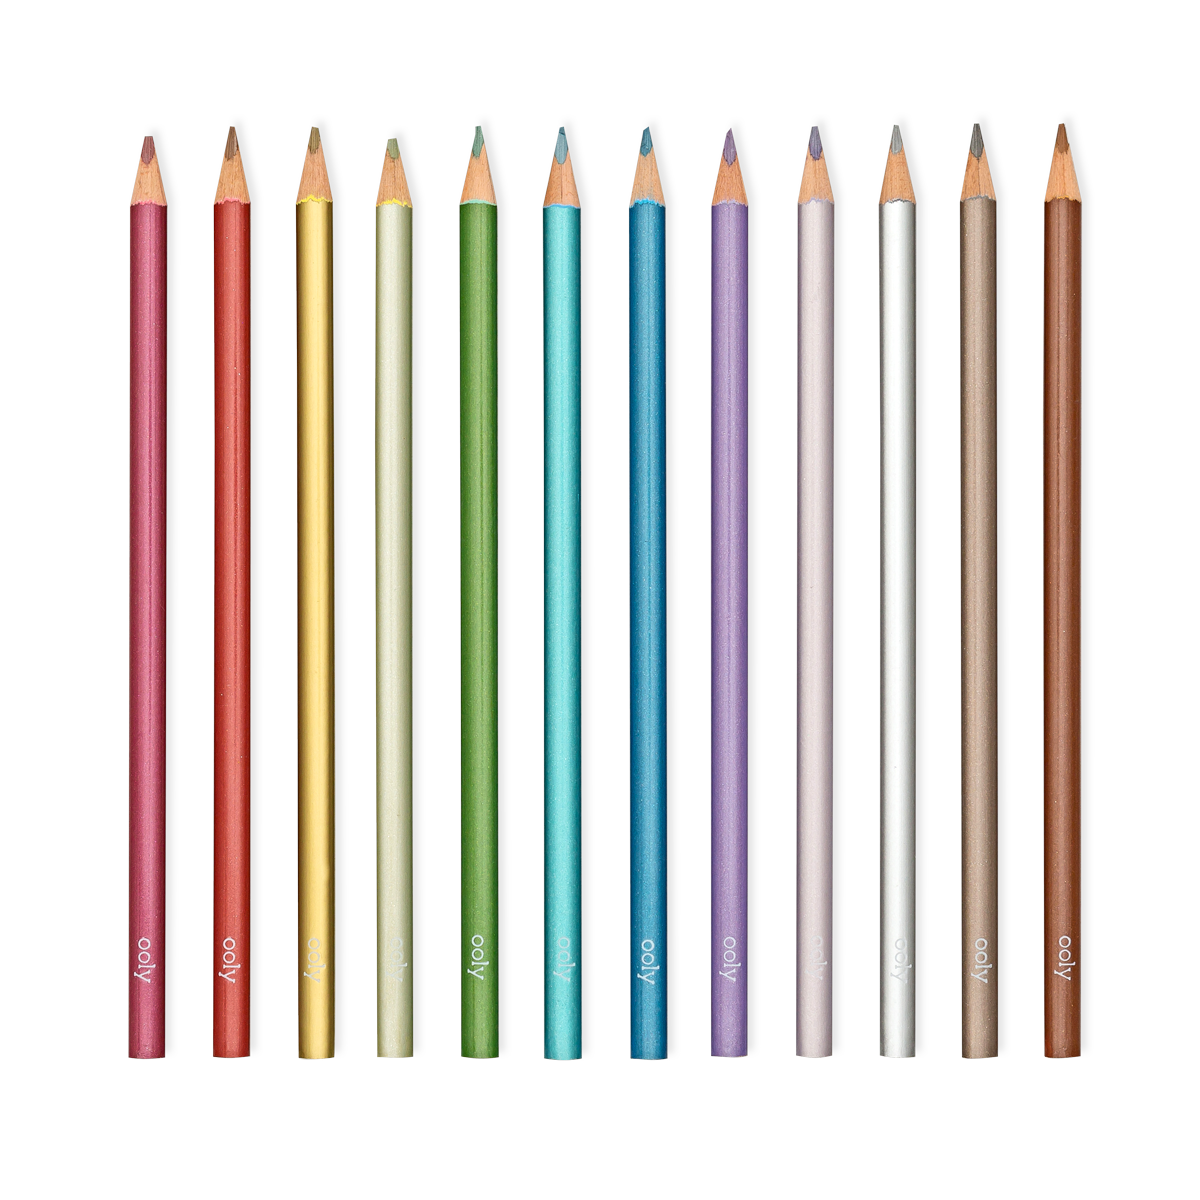 Modern Metallics Colored Pencils lined up out of packaging